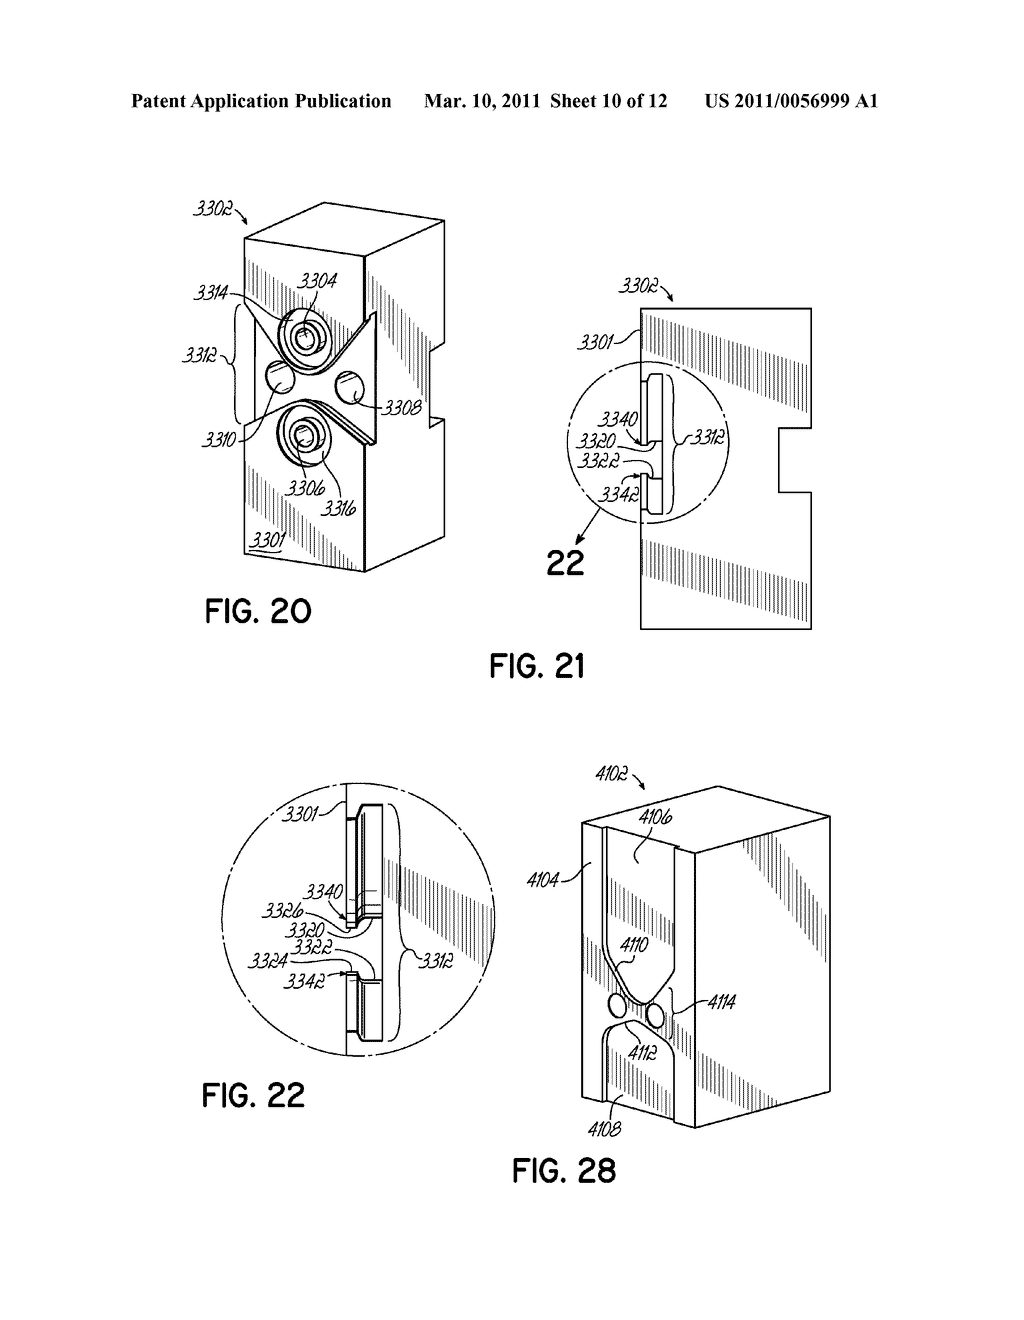 Method And System For Supporting And/Or Aligning Components Of A Liquid Dispensing System - diagram, schematic, and image 11